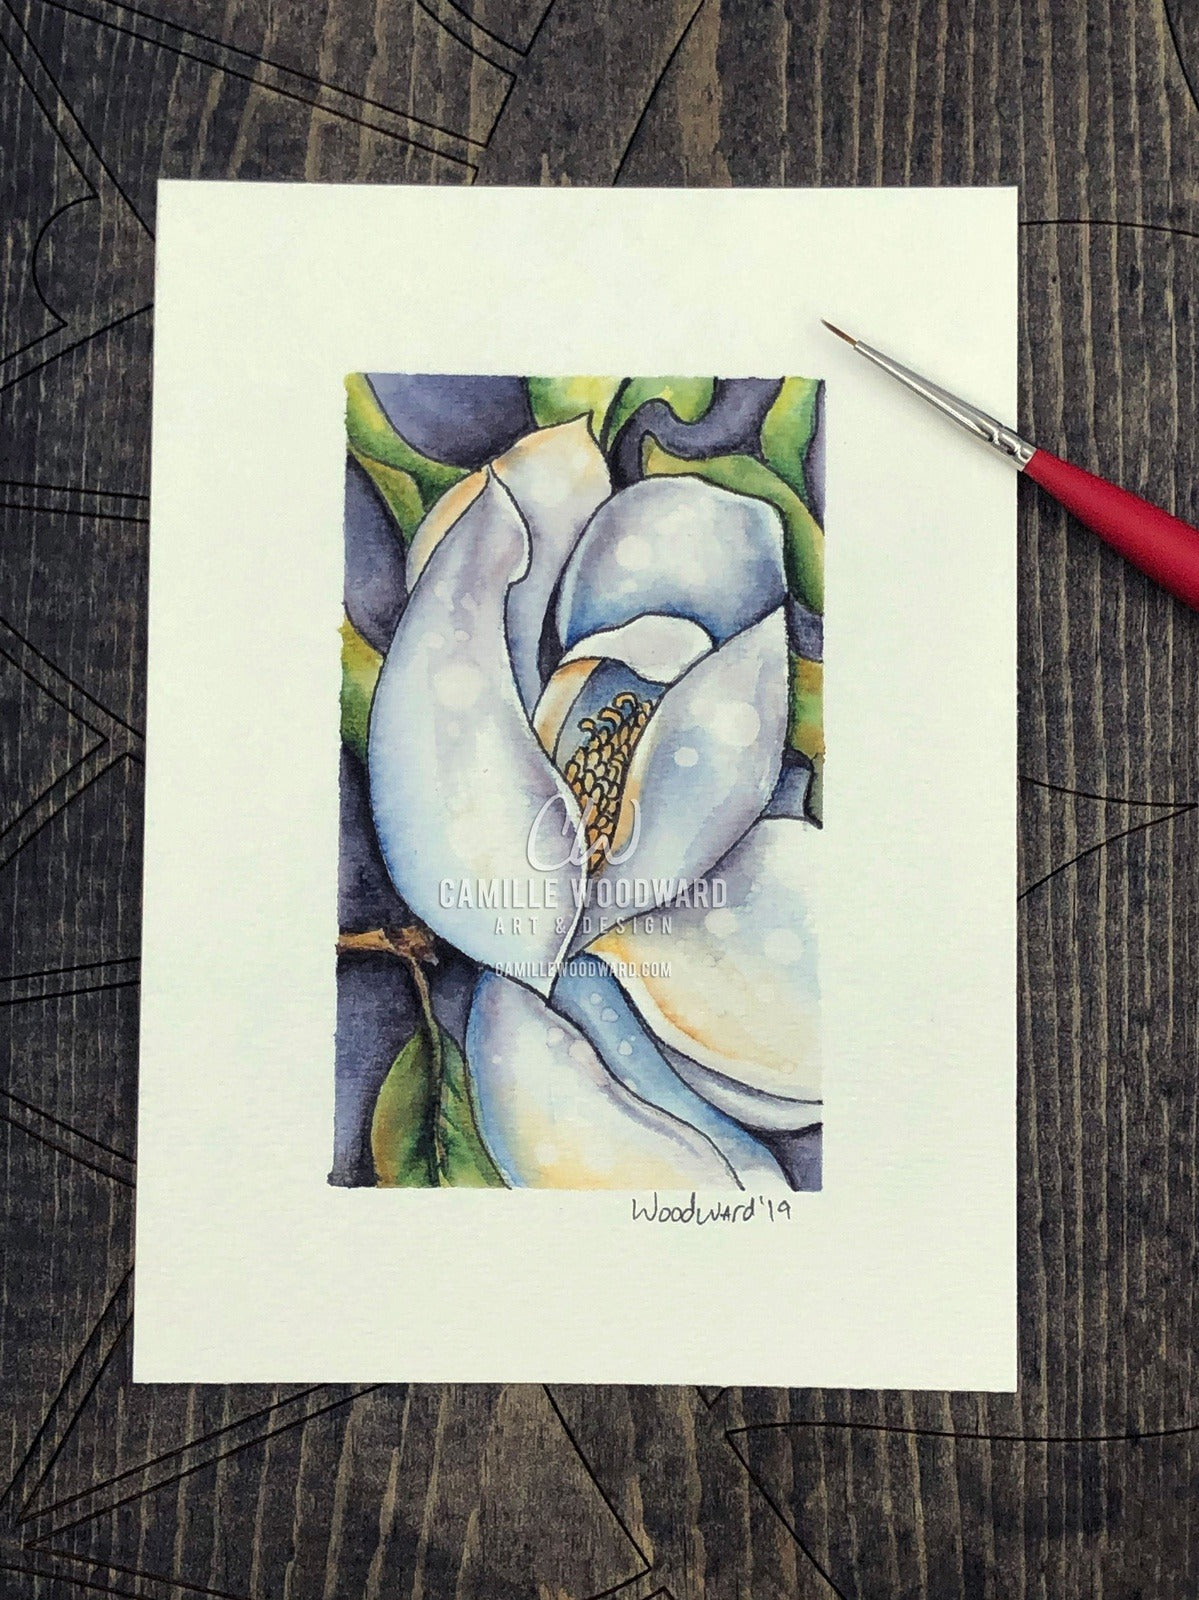 Magnolia Flower Original Watercolor Painting of White Flower with Green Leaves